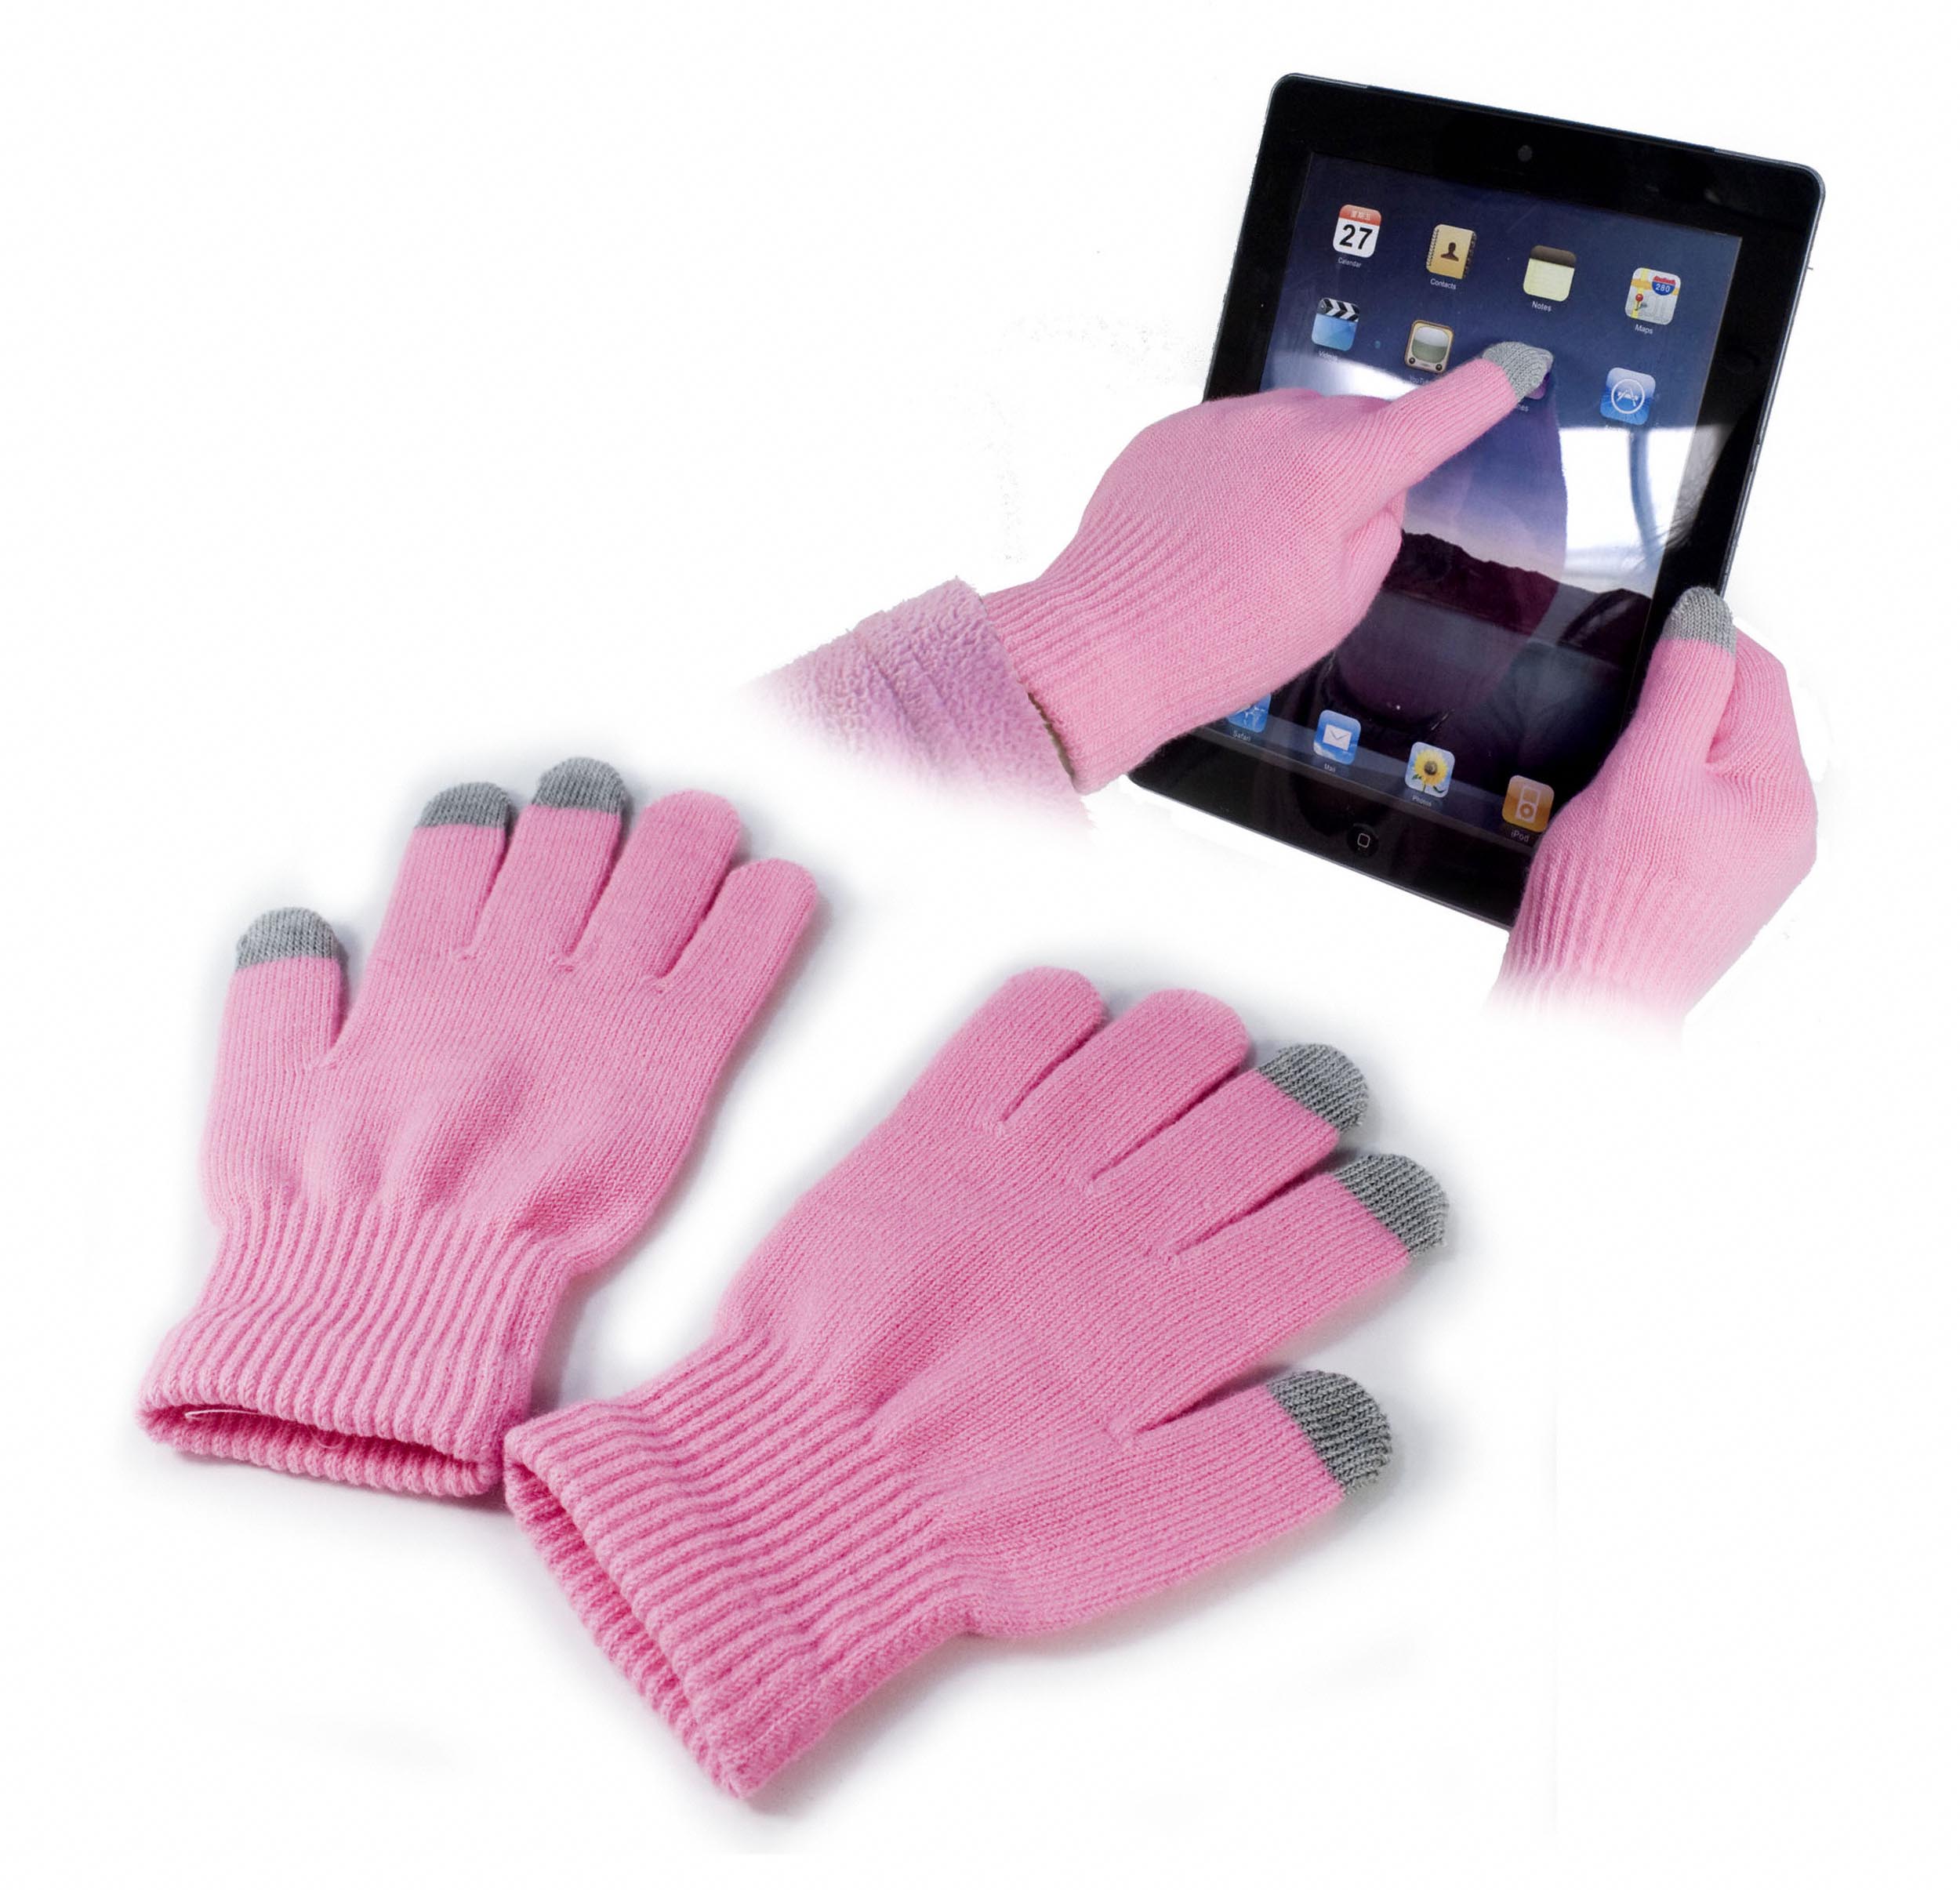 Touch-Glove Capacitive Material Cold Weather Gear Pink For Smart Touch Phone